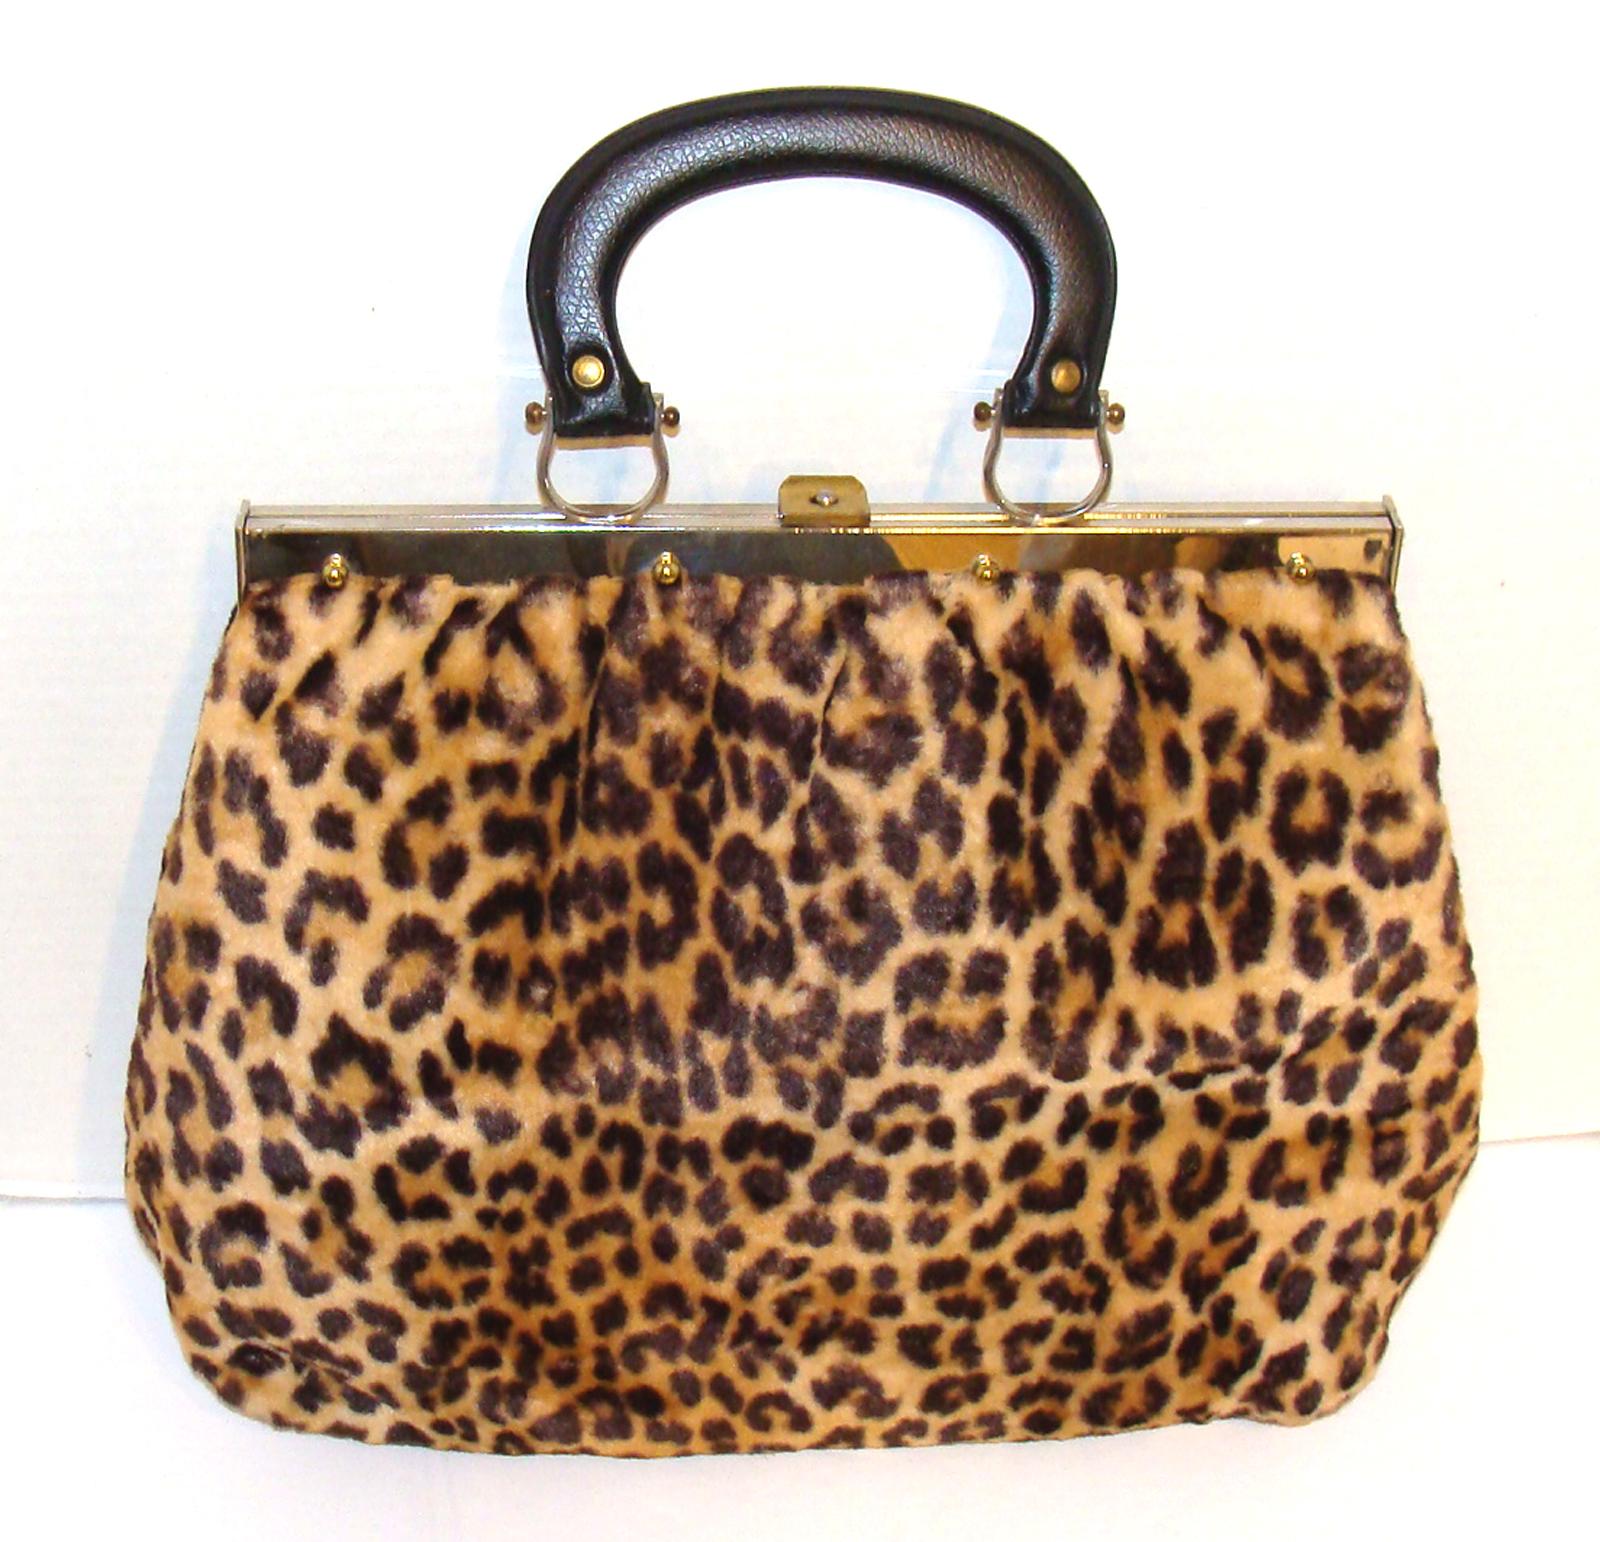 This satchel is one of our favorite faux leopard bags from the 1960's.  

The size is practical & the form is wonderful.  Practical & chic is a great combo.  You can carry an iPad & everything you need fits in this great purse (my laptop fits,